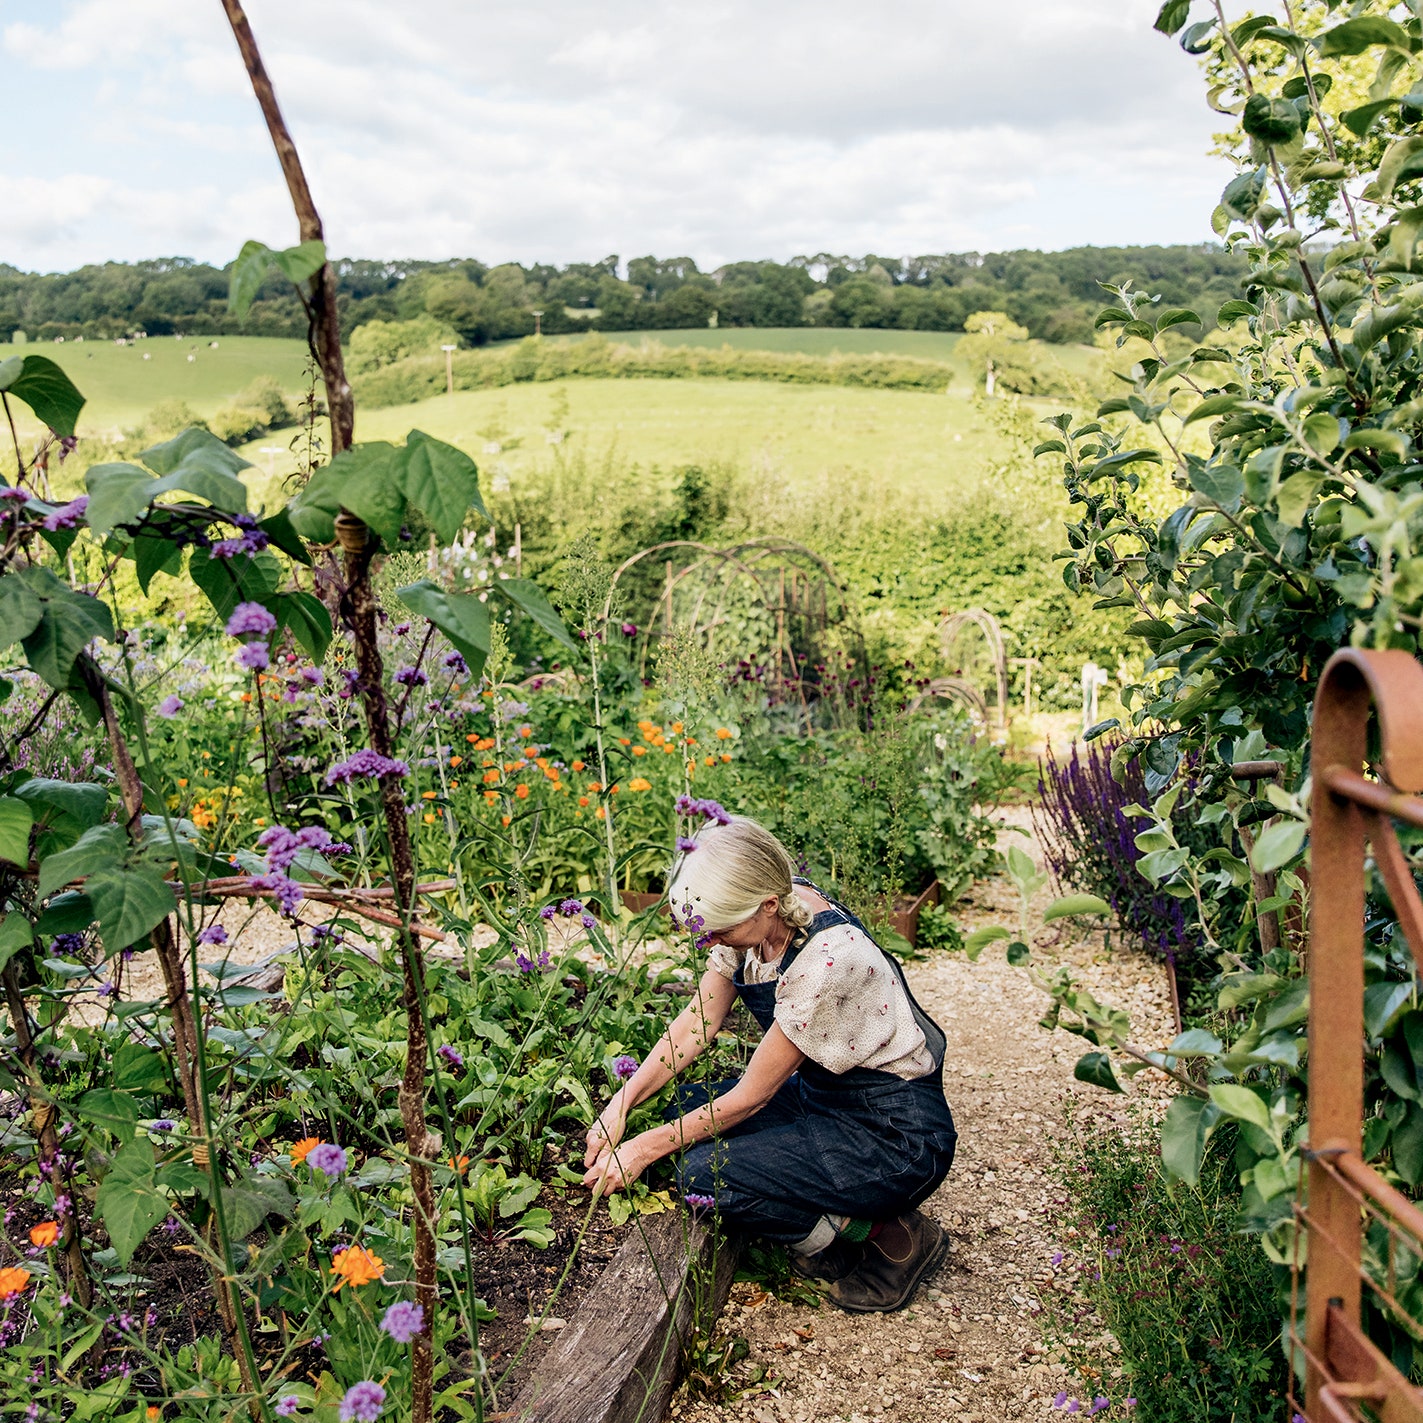 How pioneering women at the turn of 20th century changed the course of British gardening